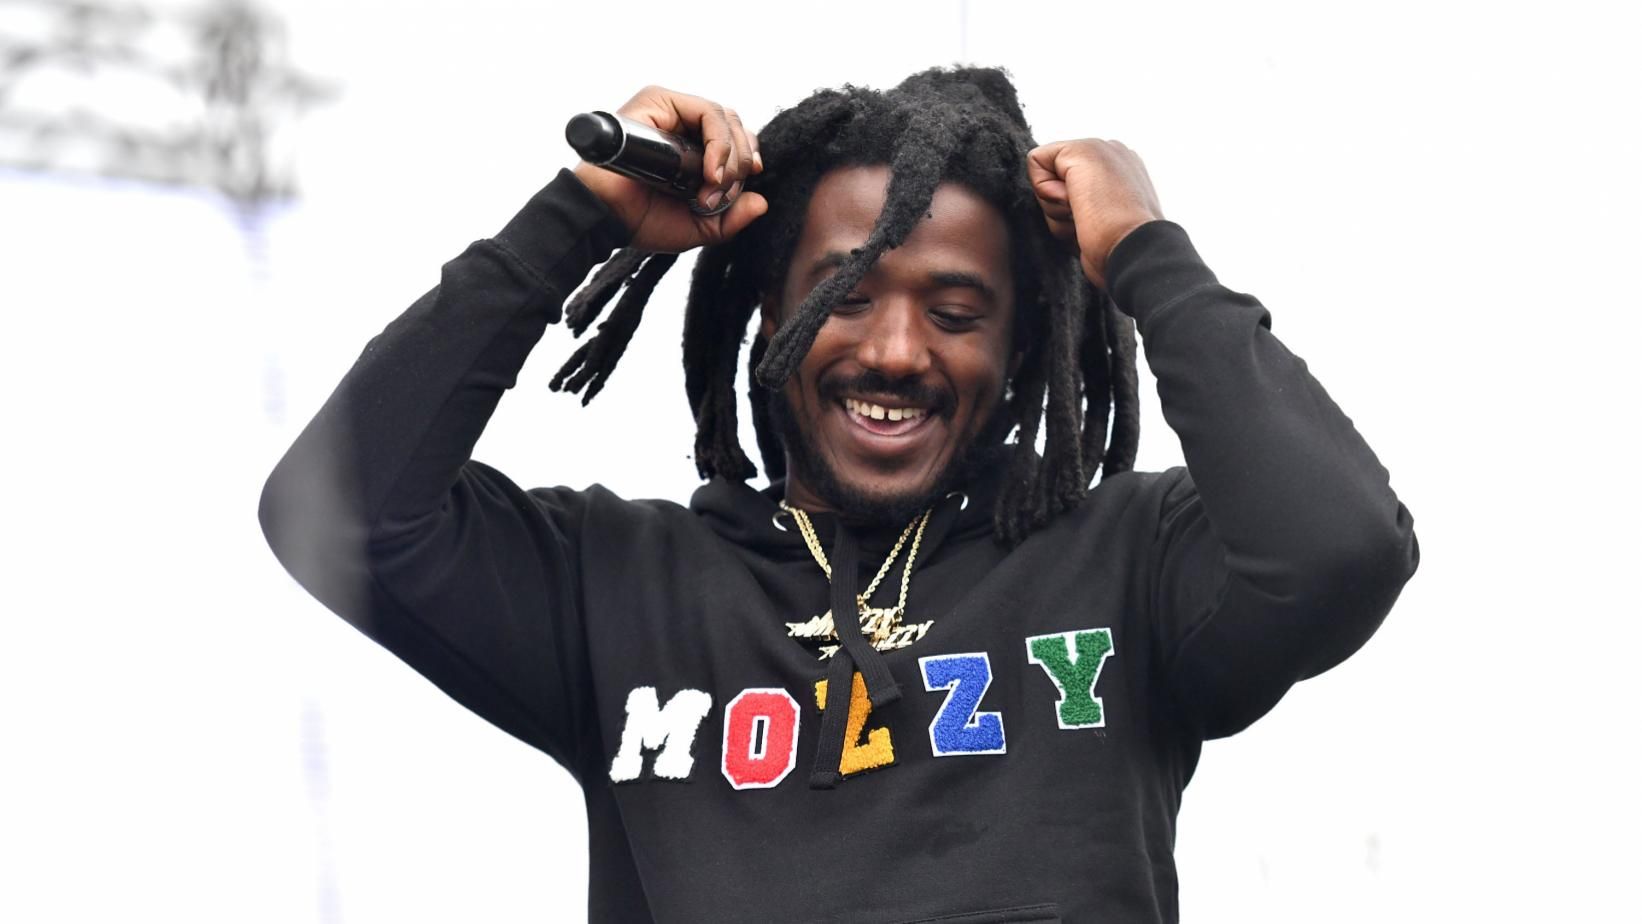 mozzy hit and run download